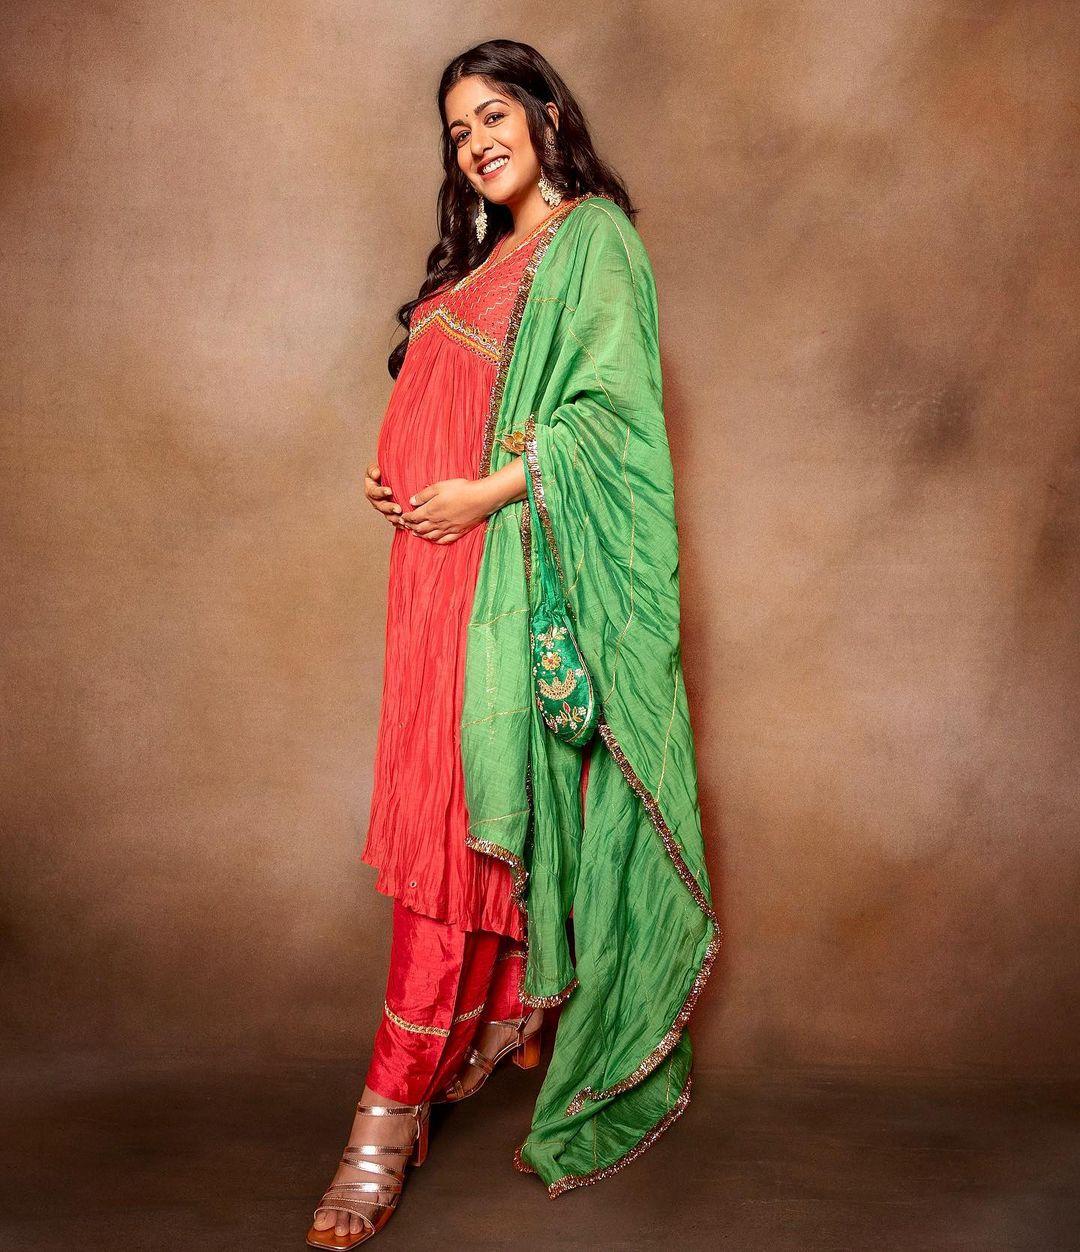 'Drishyam' actress and mum-to-be Ishita Dutta, kept it ethnic in an embroidered red and green salwar suit. The potli purse and jhumkas added to the look.